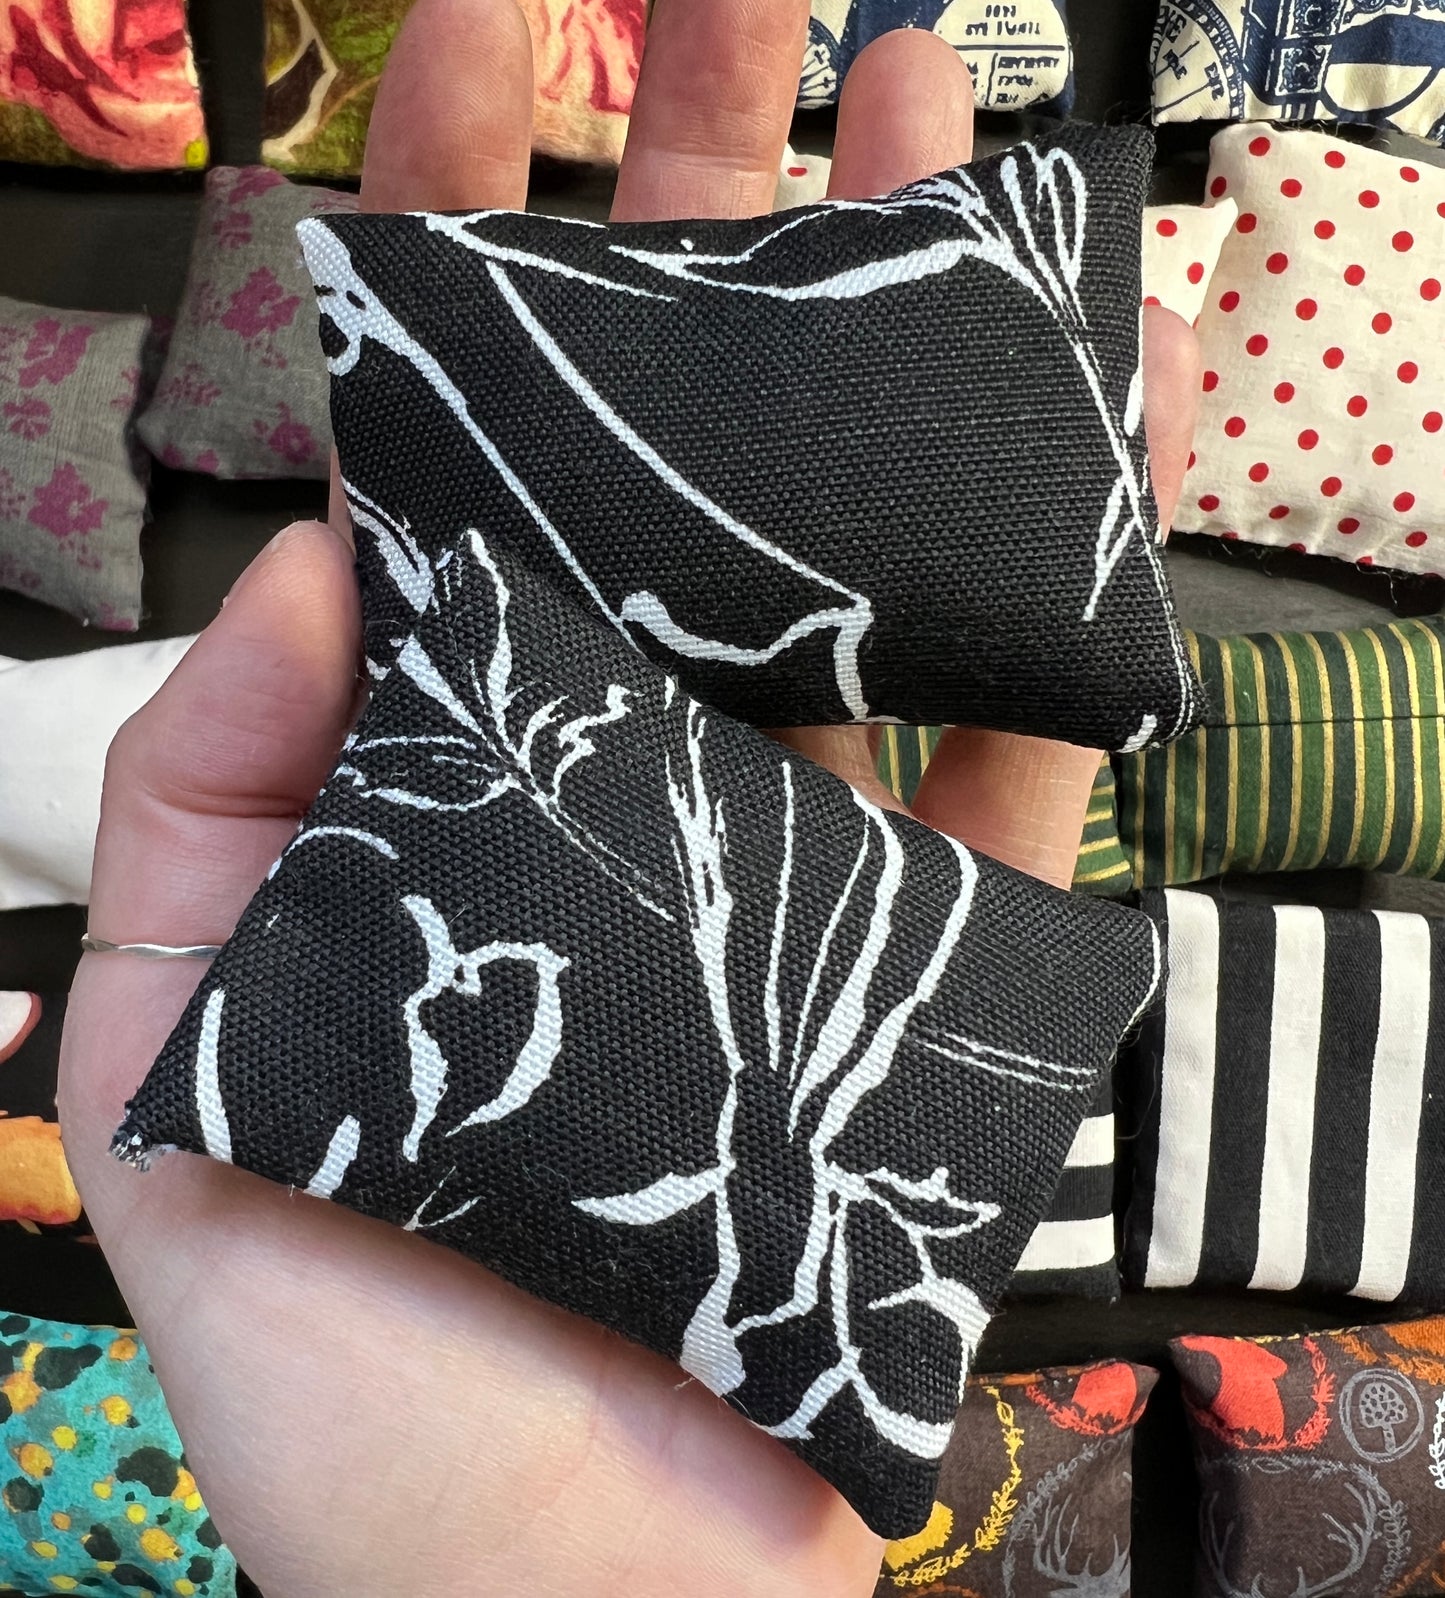 a hand holds a pair of Barbie pillows, for scale. white floral lines on a black background. other pillows in distance